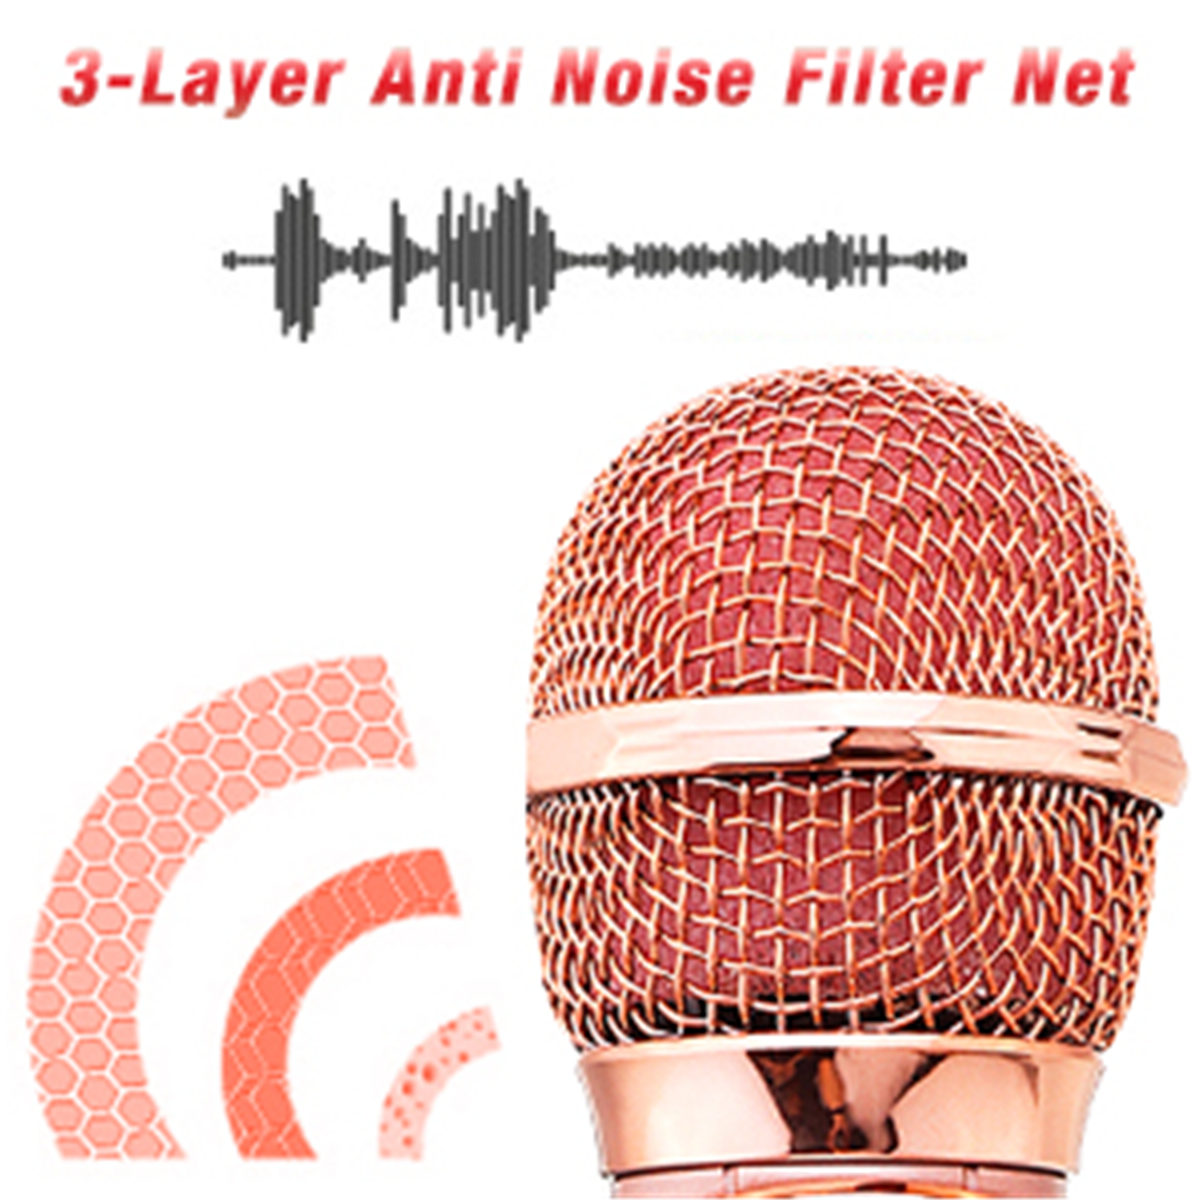 Wireless-Microphone-Hifi-Speaker-bluetooth-Magnetic-USB-Charging-Sound-Quality-Microphone-1824497-3